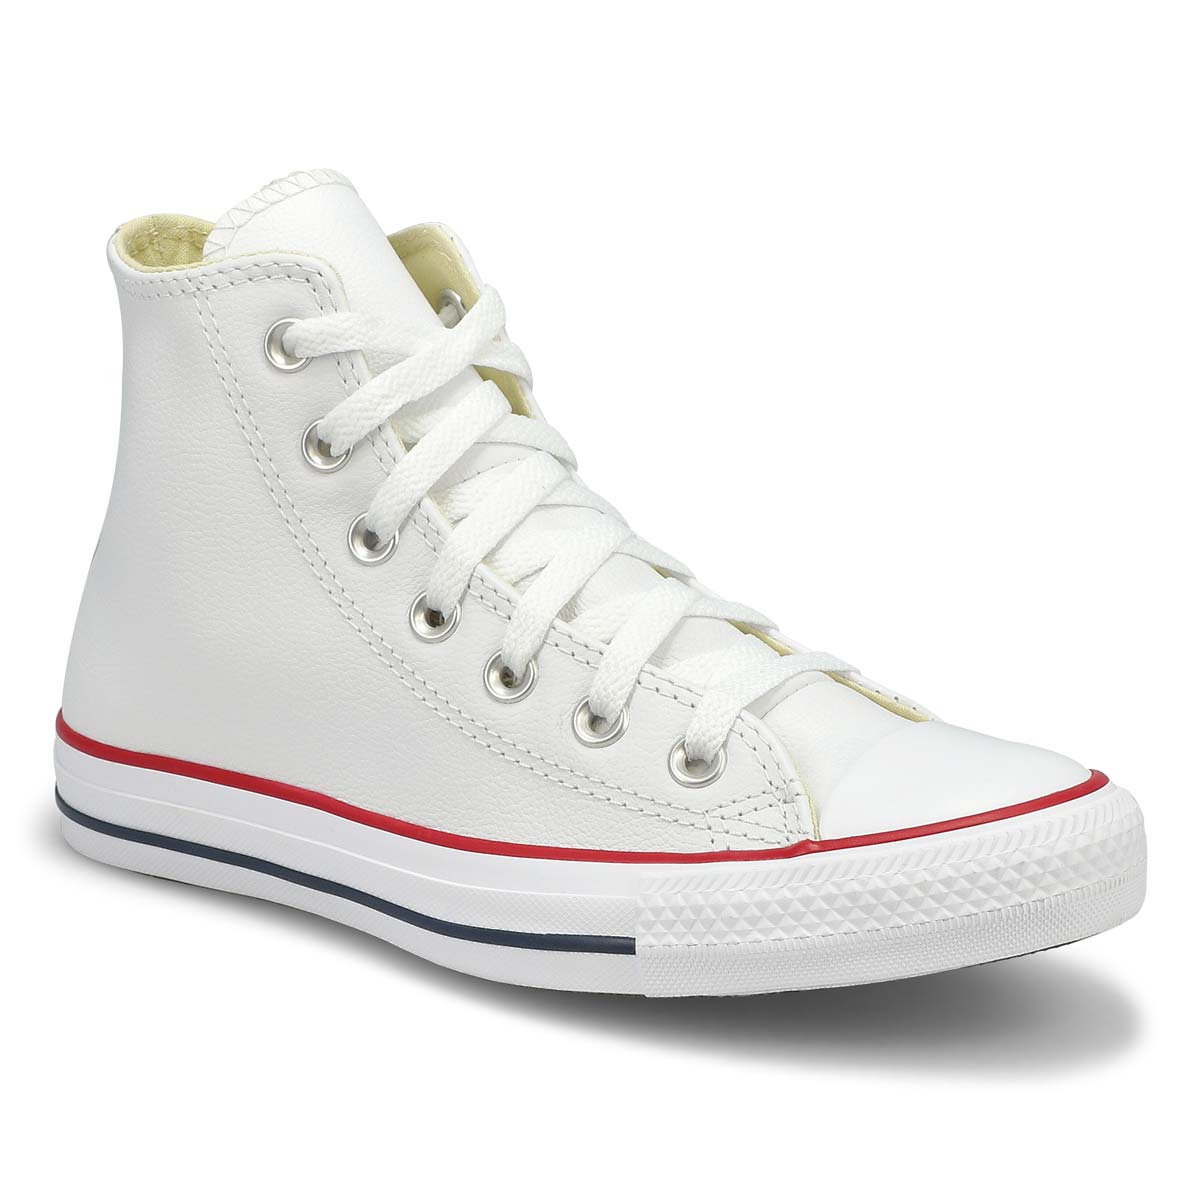 converse all star high top sneakers